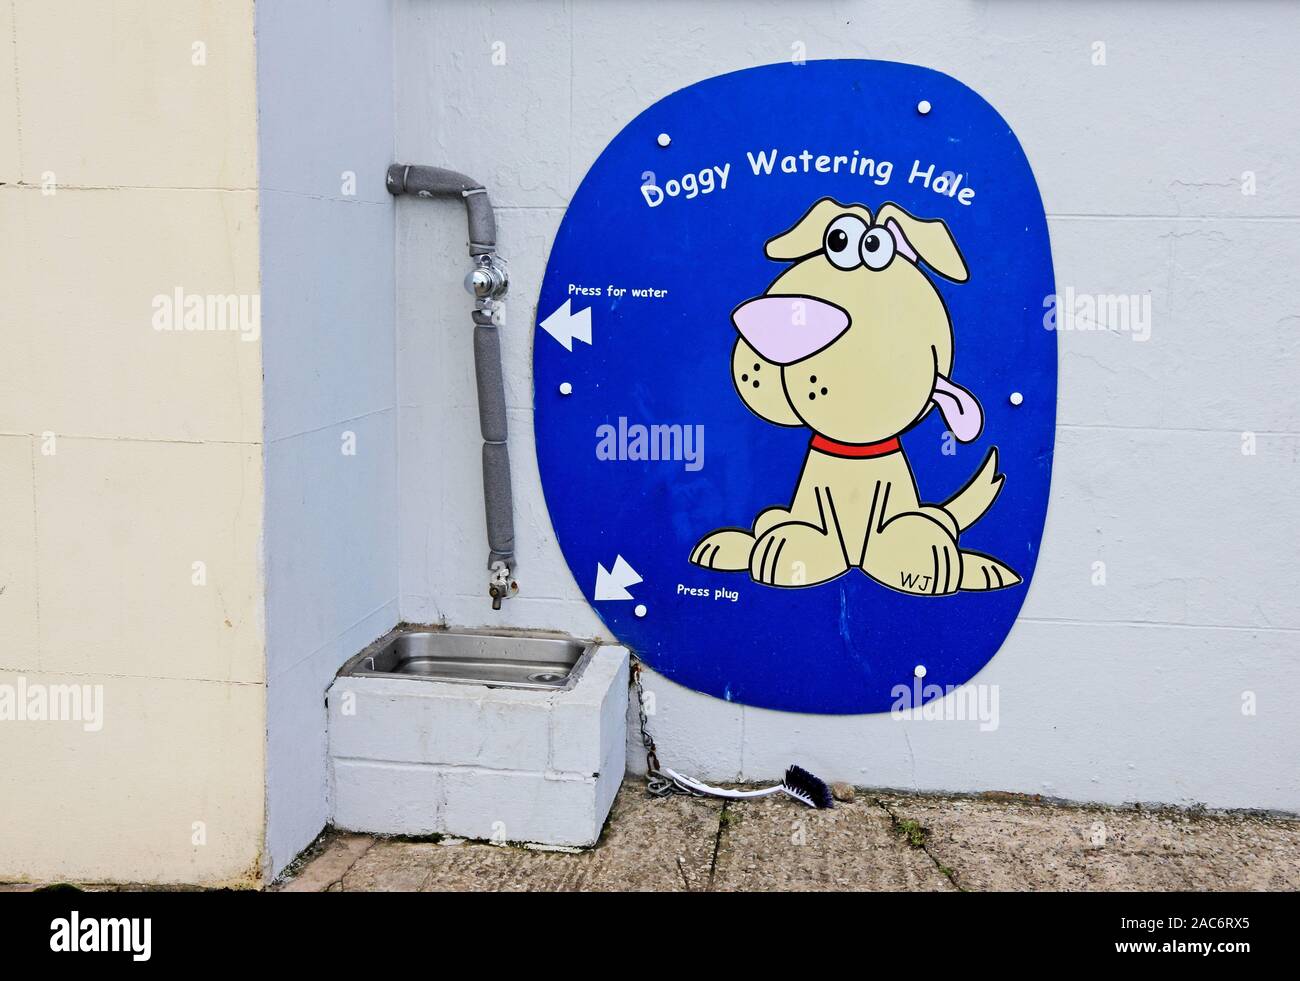 Doggy Watering Hole sign, Summit Complex, Great Orme, Llandudno Stock Photo